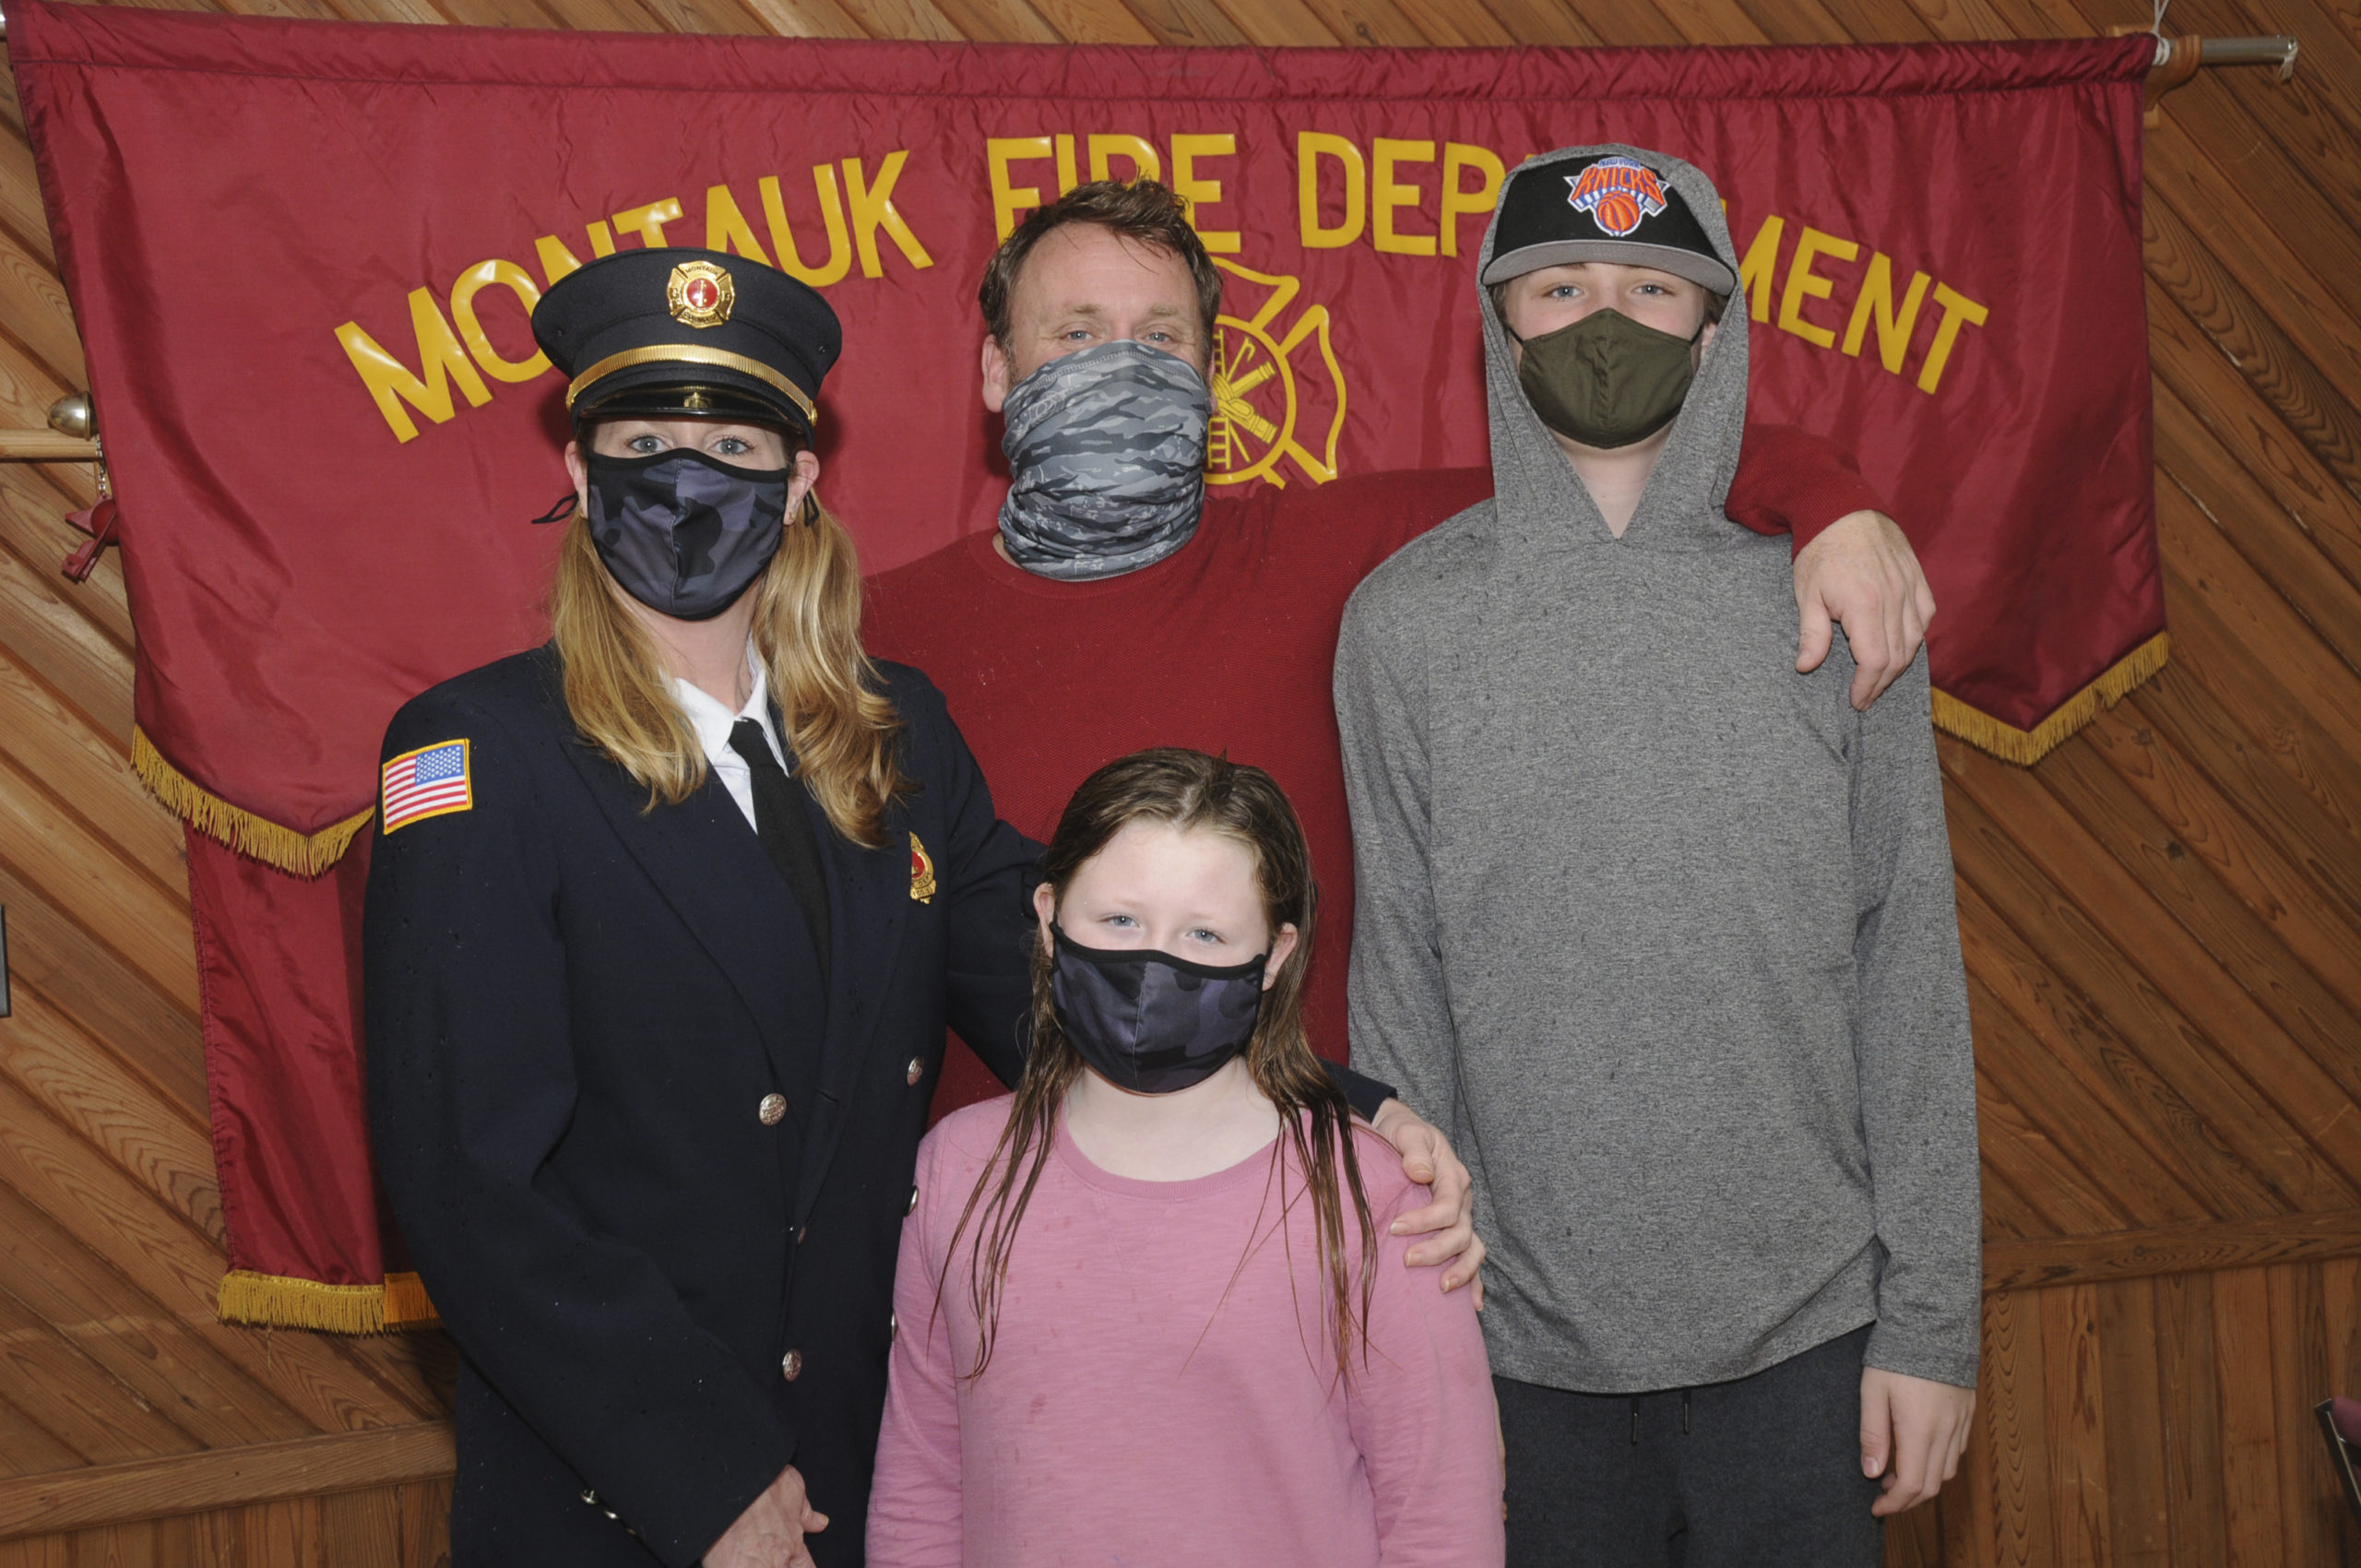 Installed as Lieutenant of Montauk Fire Department Company No. 2 on January 1, was Heather Matthews, who posed proudly with her husband Brian, son Sullivan and daughter Sadie.   RICHARD LEWIN